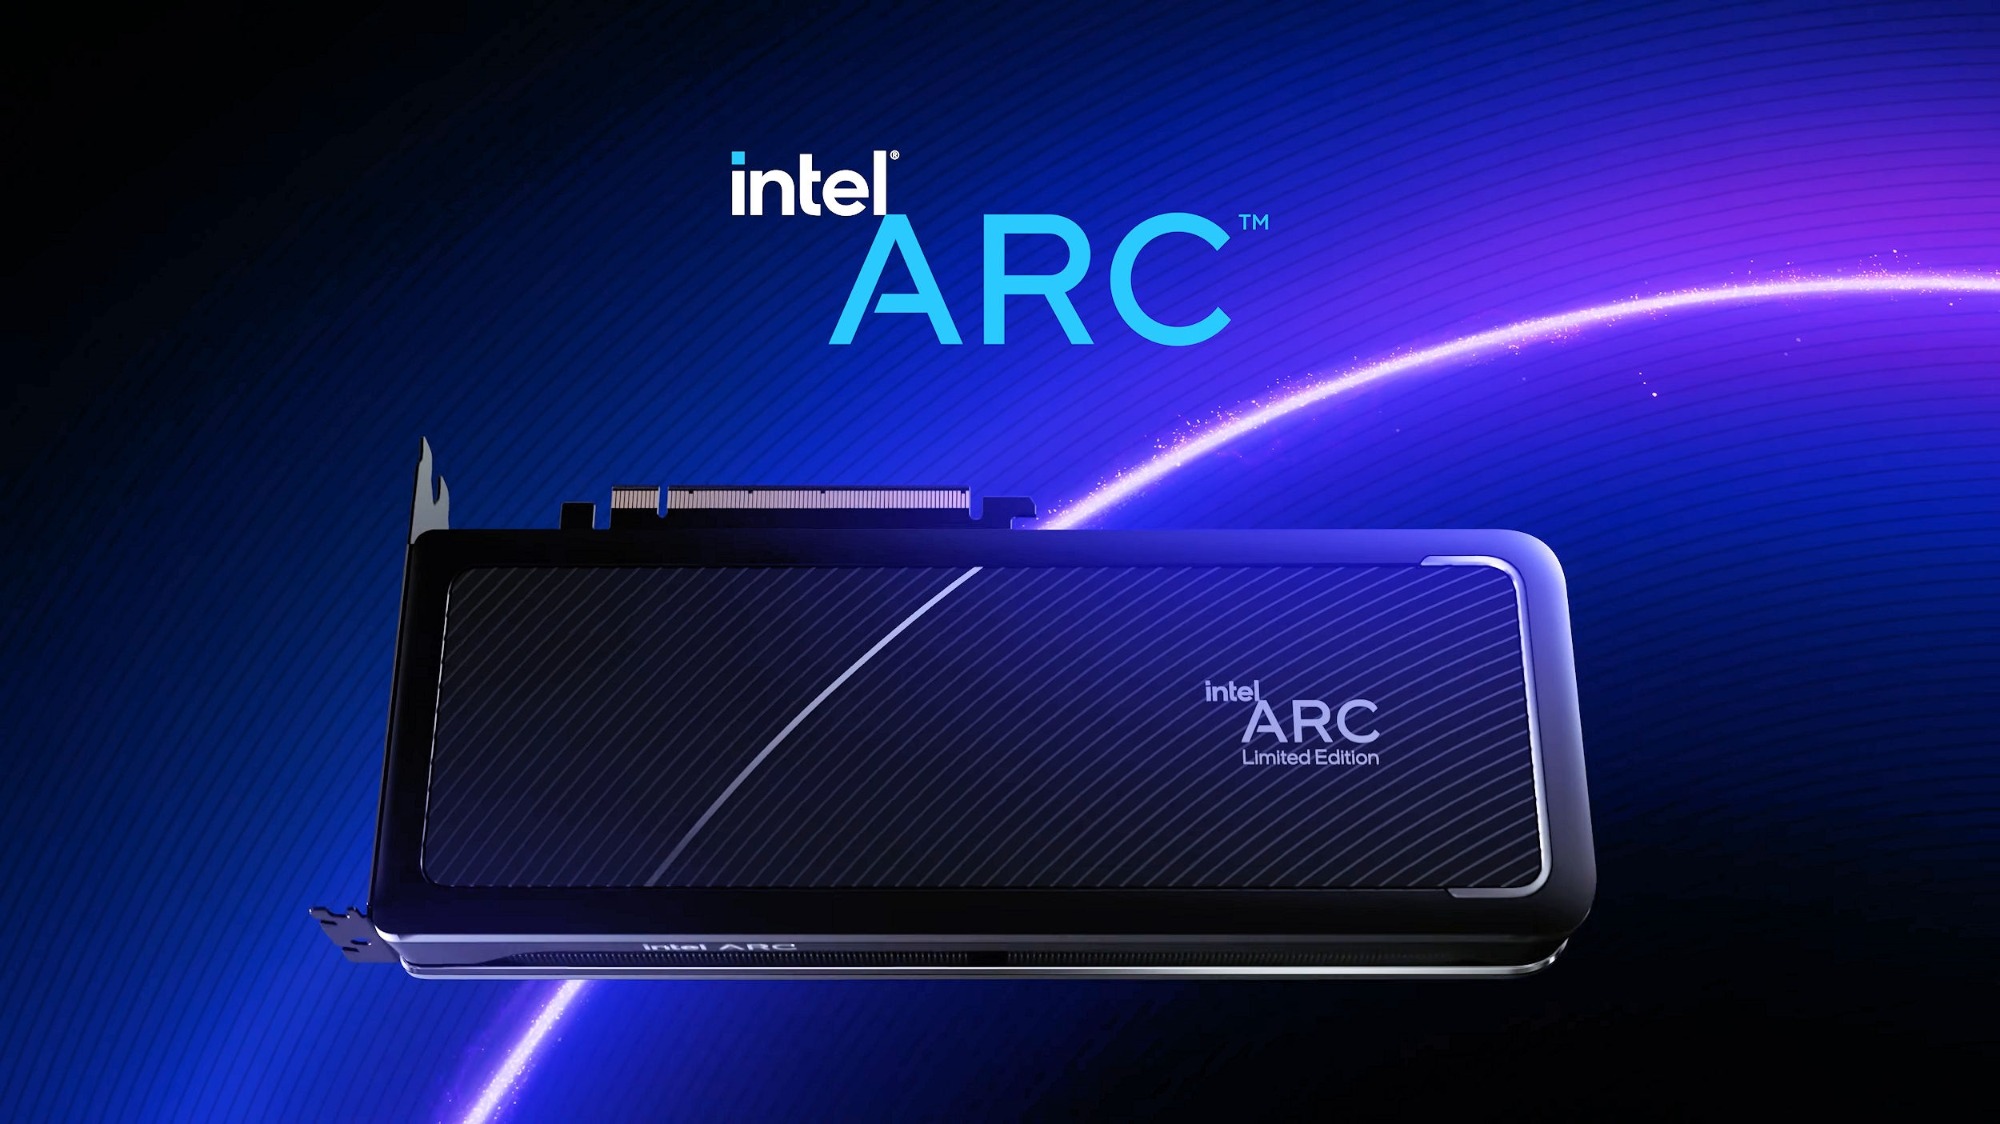 Why does Intel make graphics cards, and the full lineup of Arc graphics cards is exposed